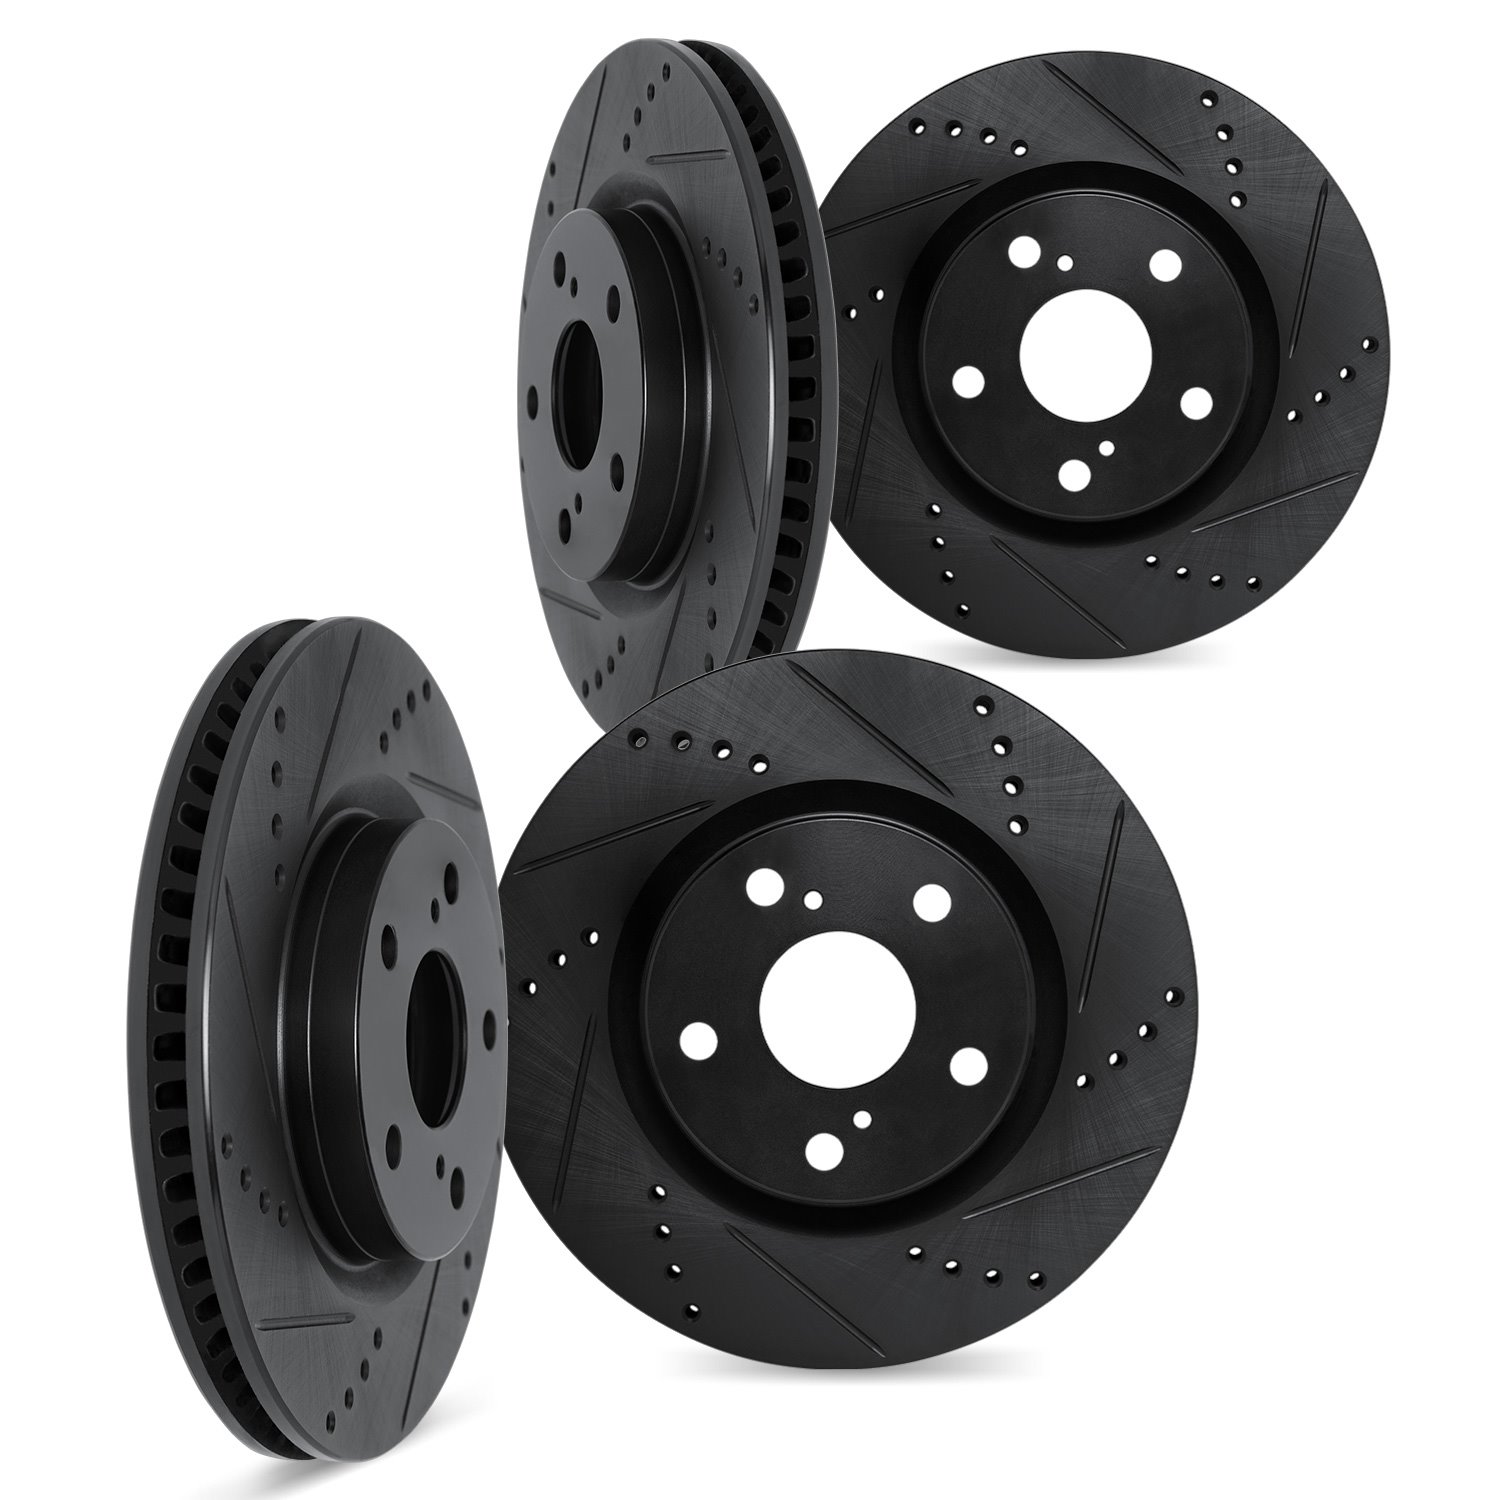 8004-11020 Drilled/Slotted Brake Rotors [Black], 2006-2012 Land Rover, Position: Front and Rear